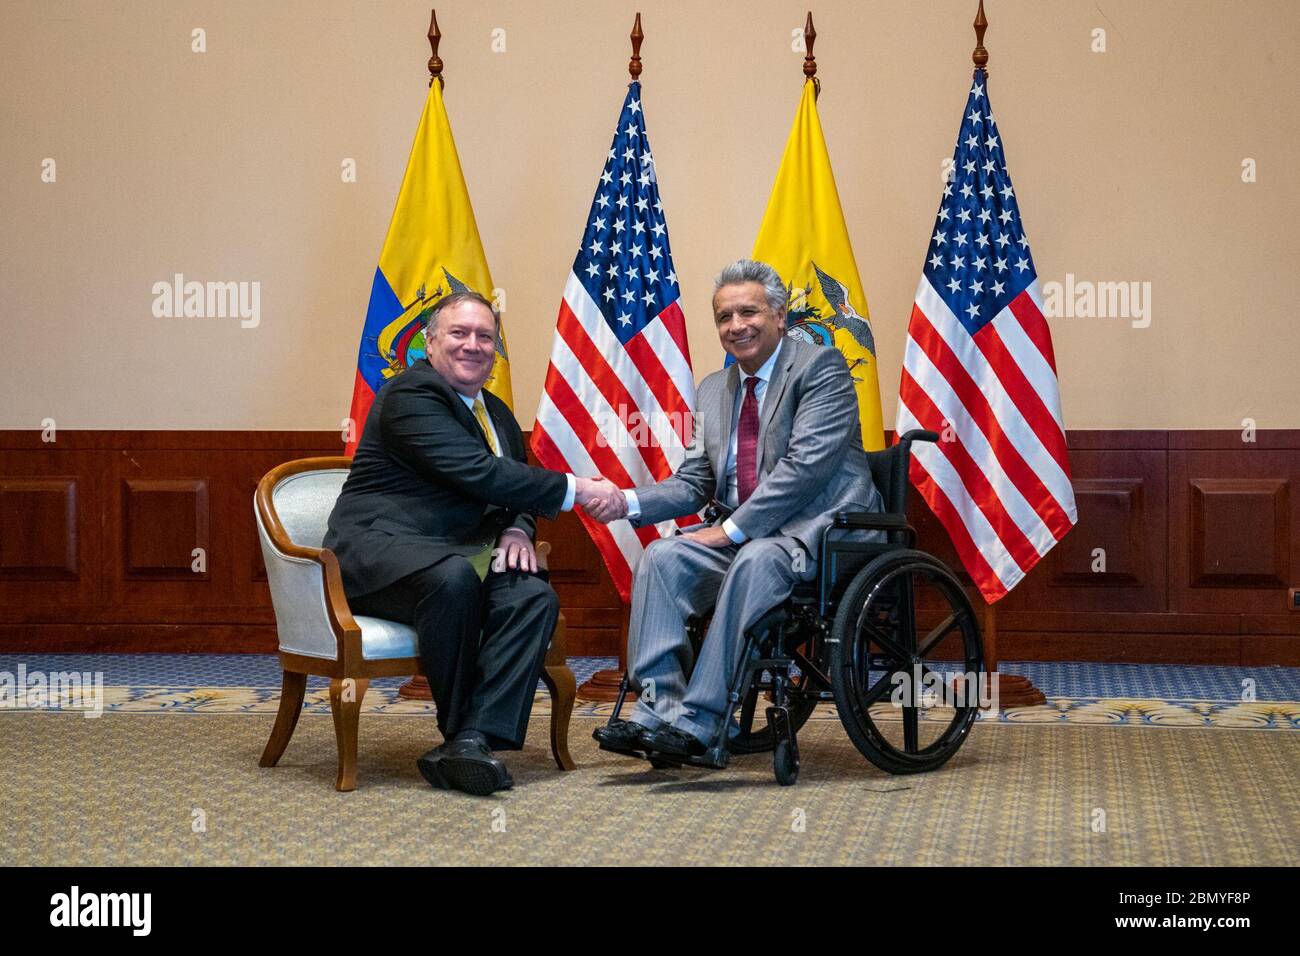 Secretary Pompeo Meets With President Moreno in Ecuador Secretary of State Michael R. Pompeo participates in a greeting and photo with Ecuadorian President Lenin Moreno, in Guayaquil, Ecuador, July 20, 2019. Stock Photo